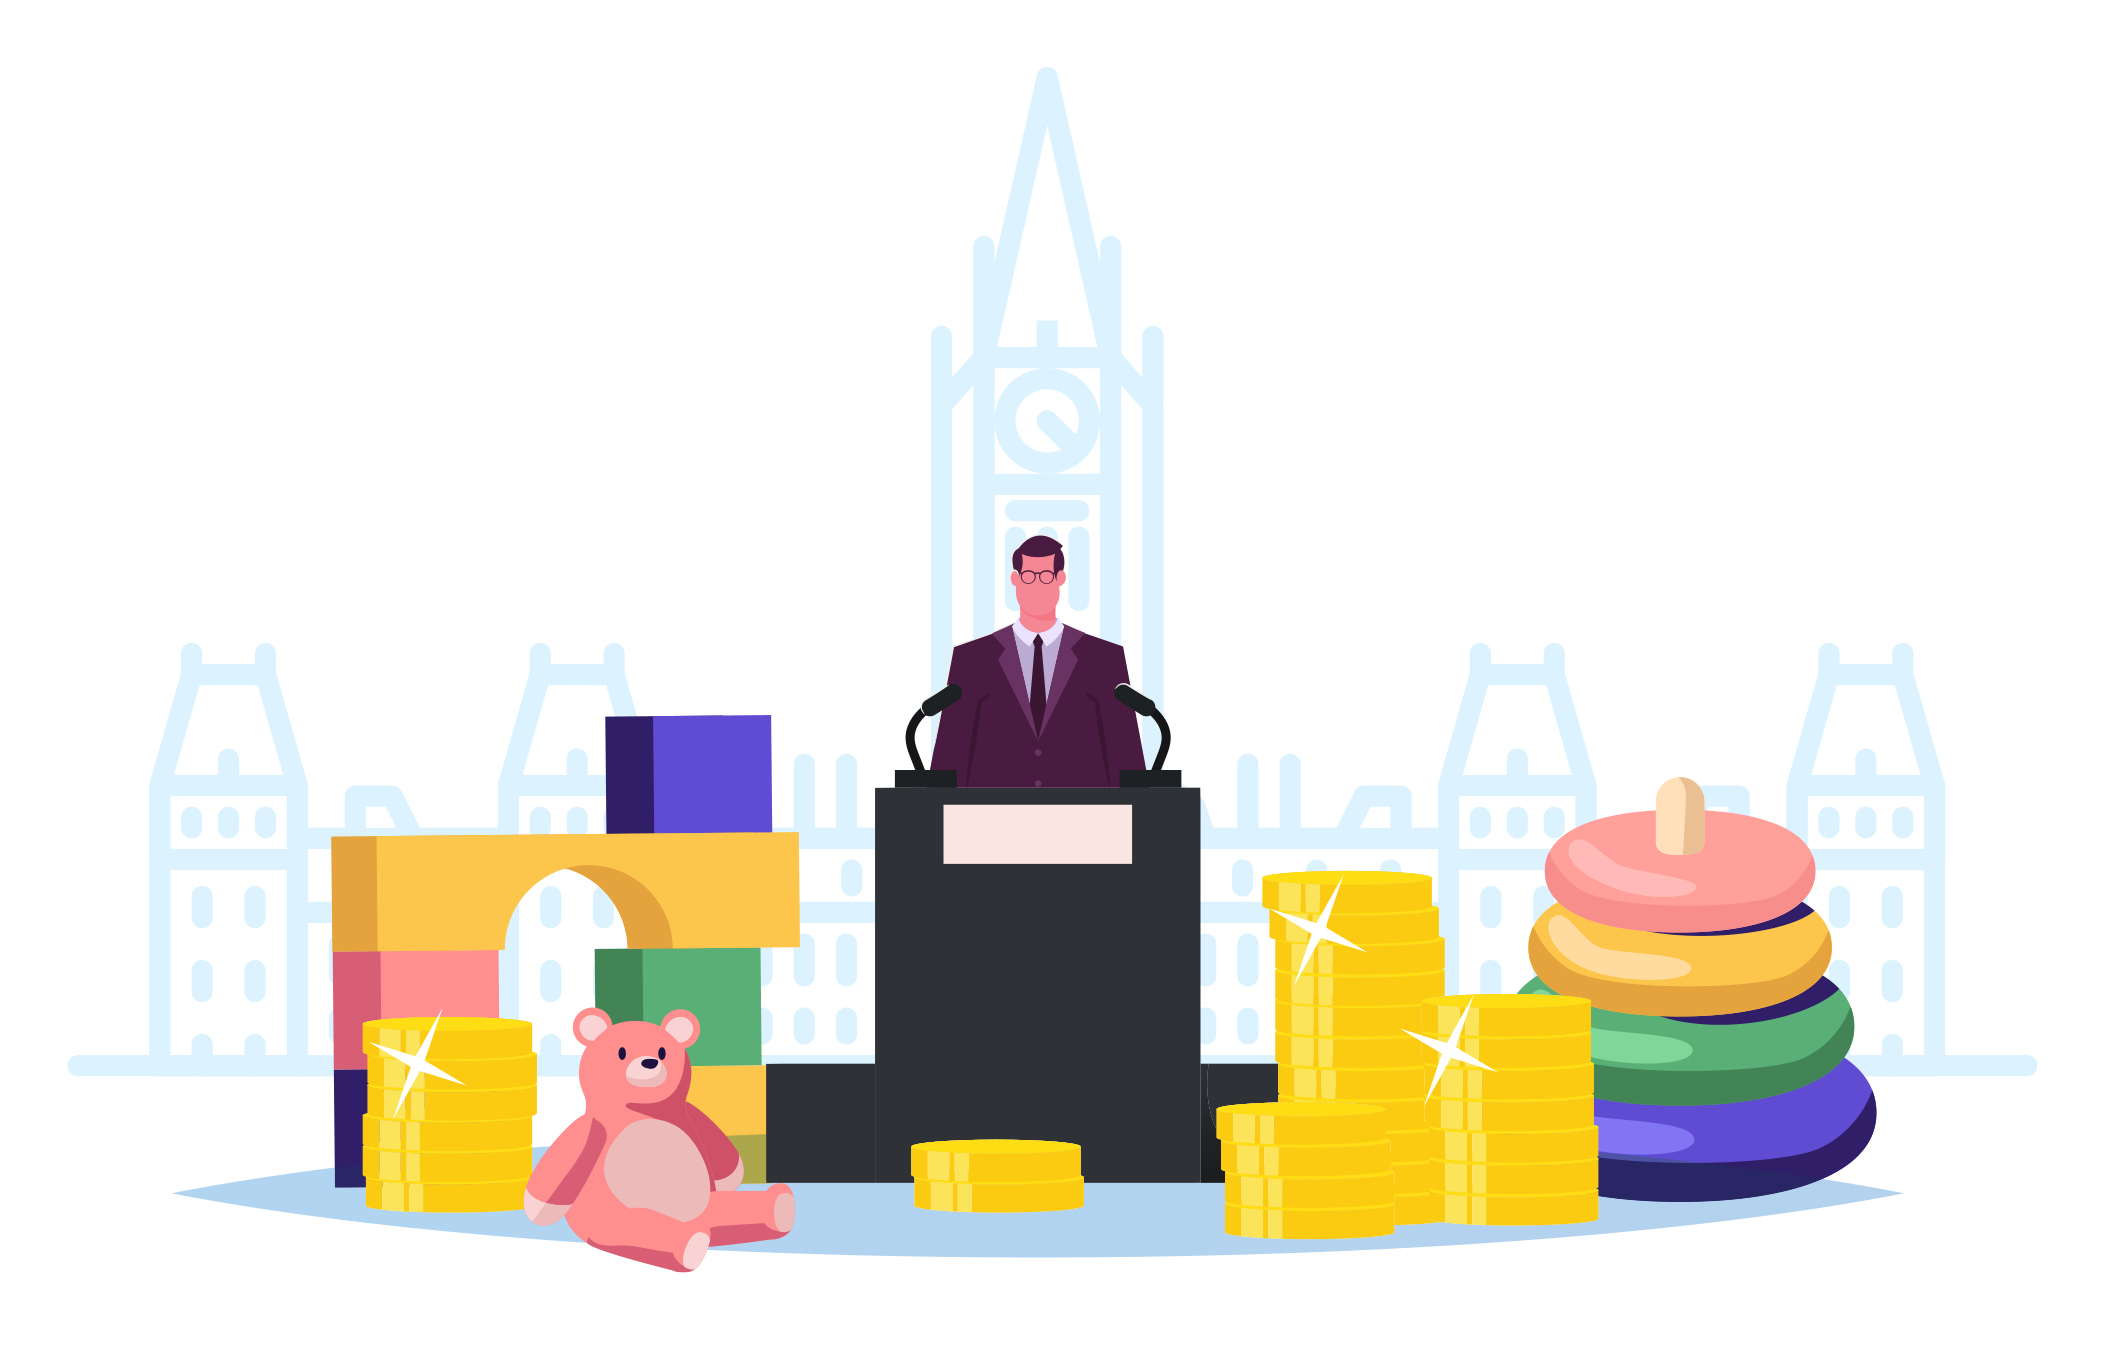 Illustrated - Politician speaking at podium amongst toys and money